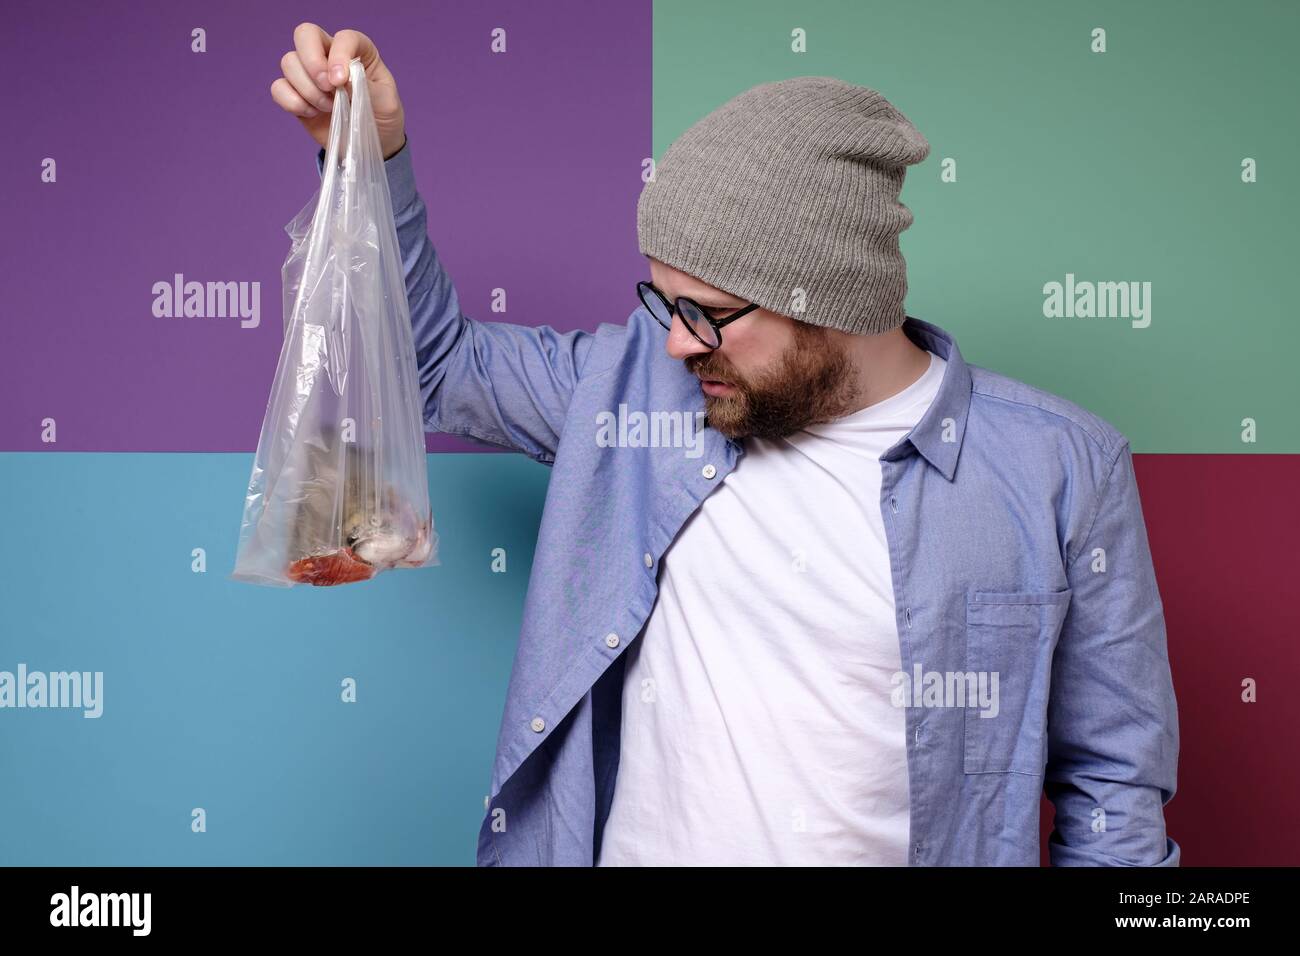 Man with dislike looking at the stinking fish in a transparent bag. Stock Photo